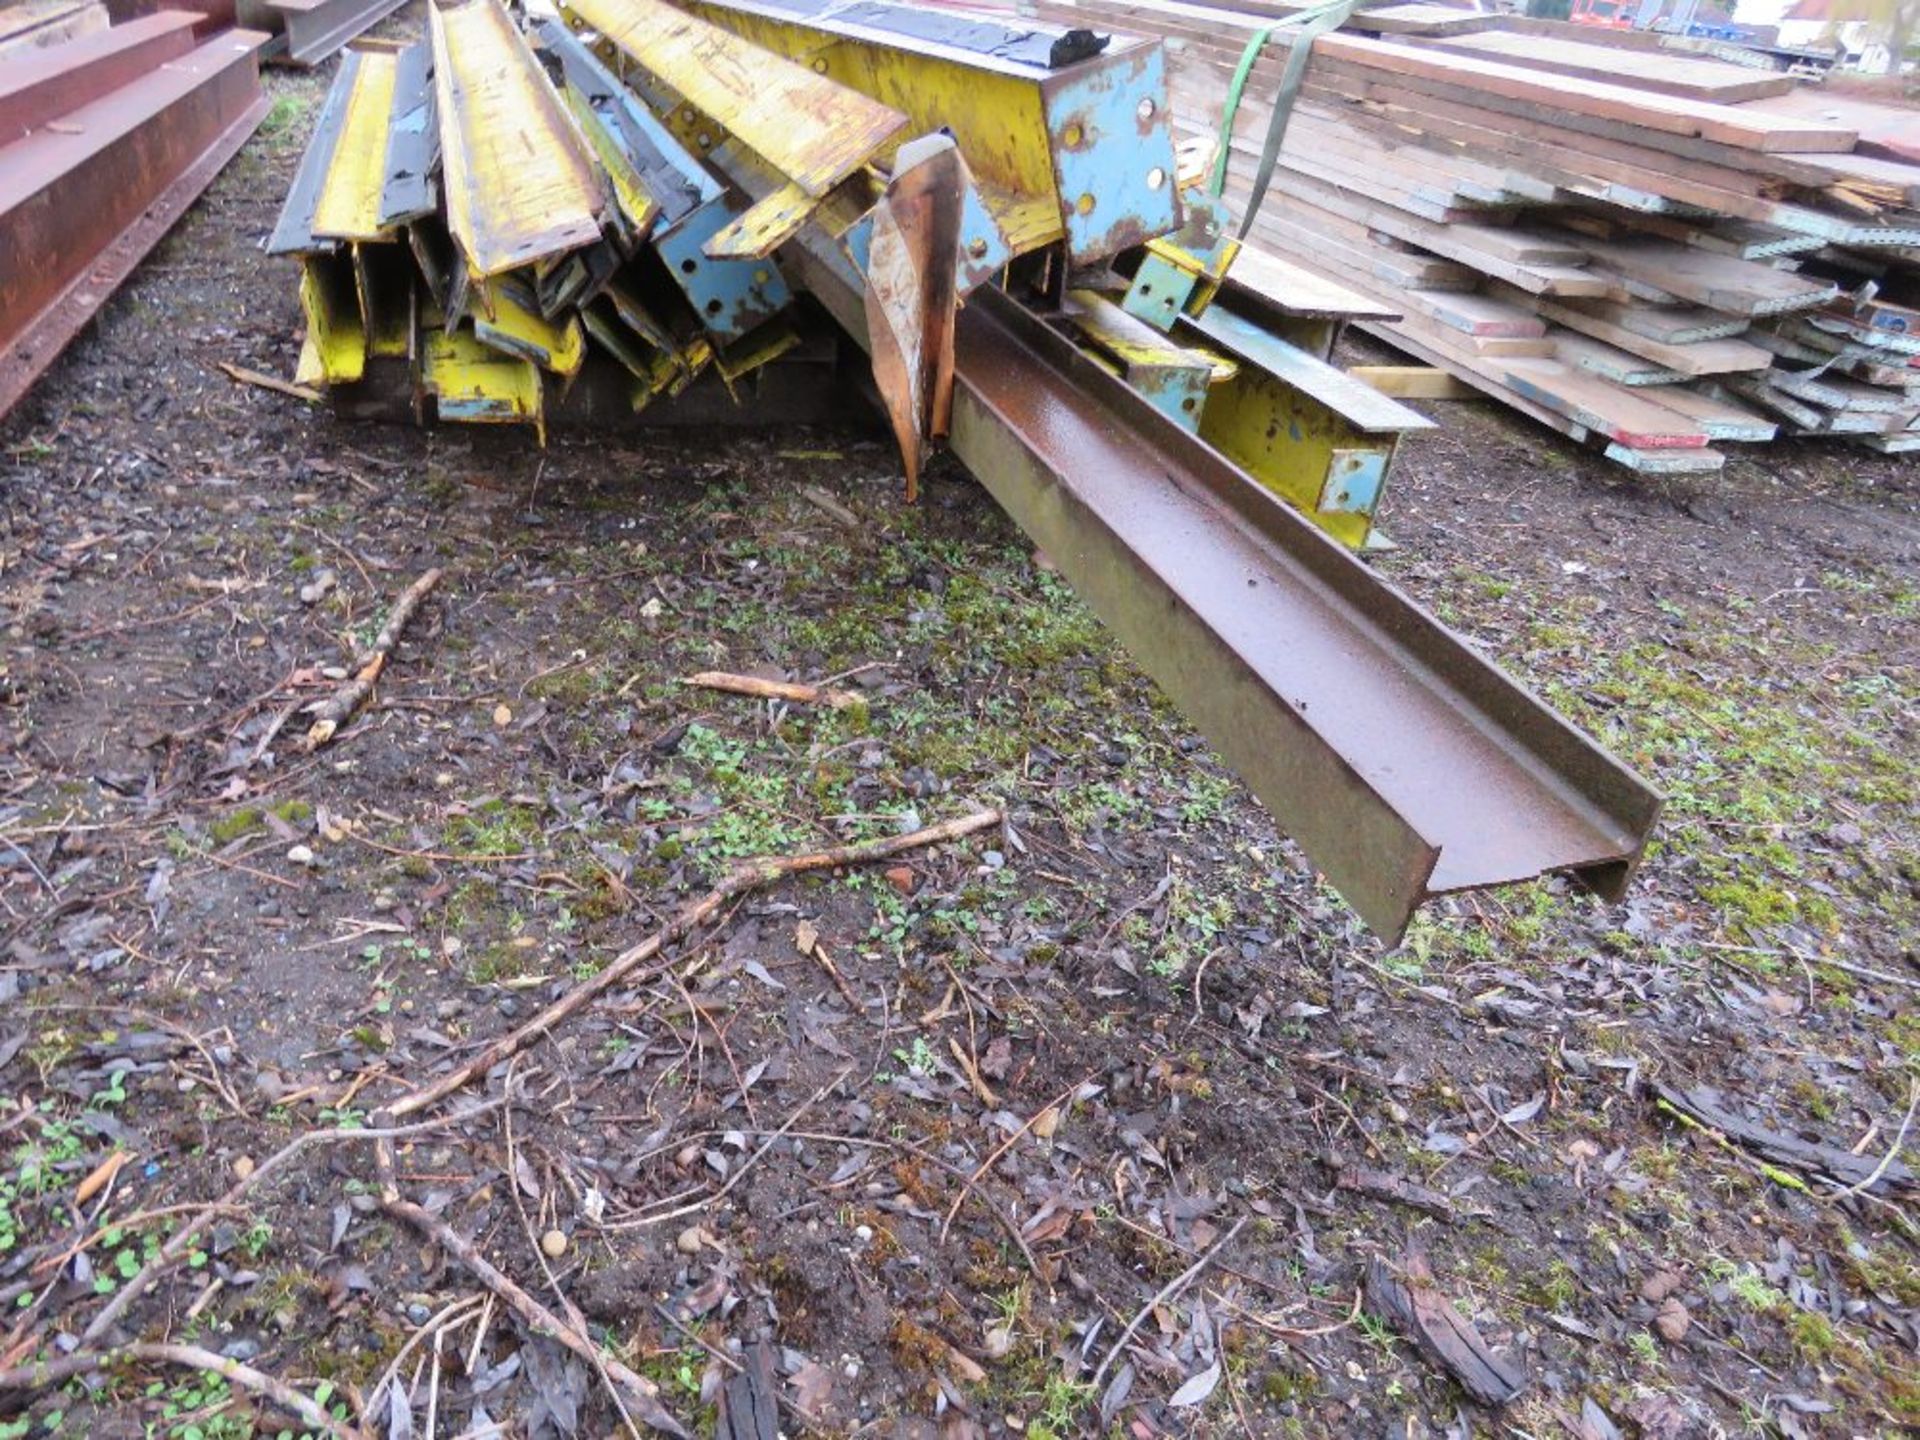 STACK OF YELLOW HEAVY DUTY RSJ STEEL LINTELS, MAINLY 2.9M - 4.8M LENGTH APPROX. - Image 4 of 7